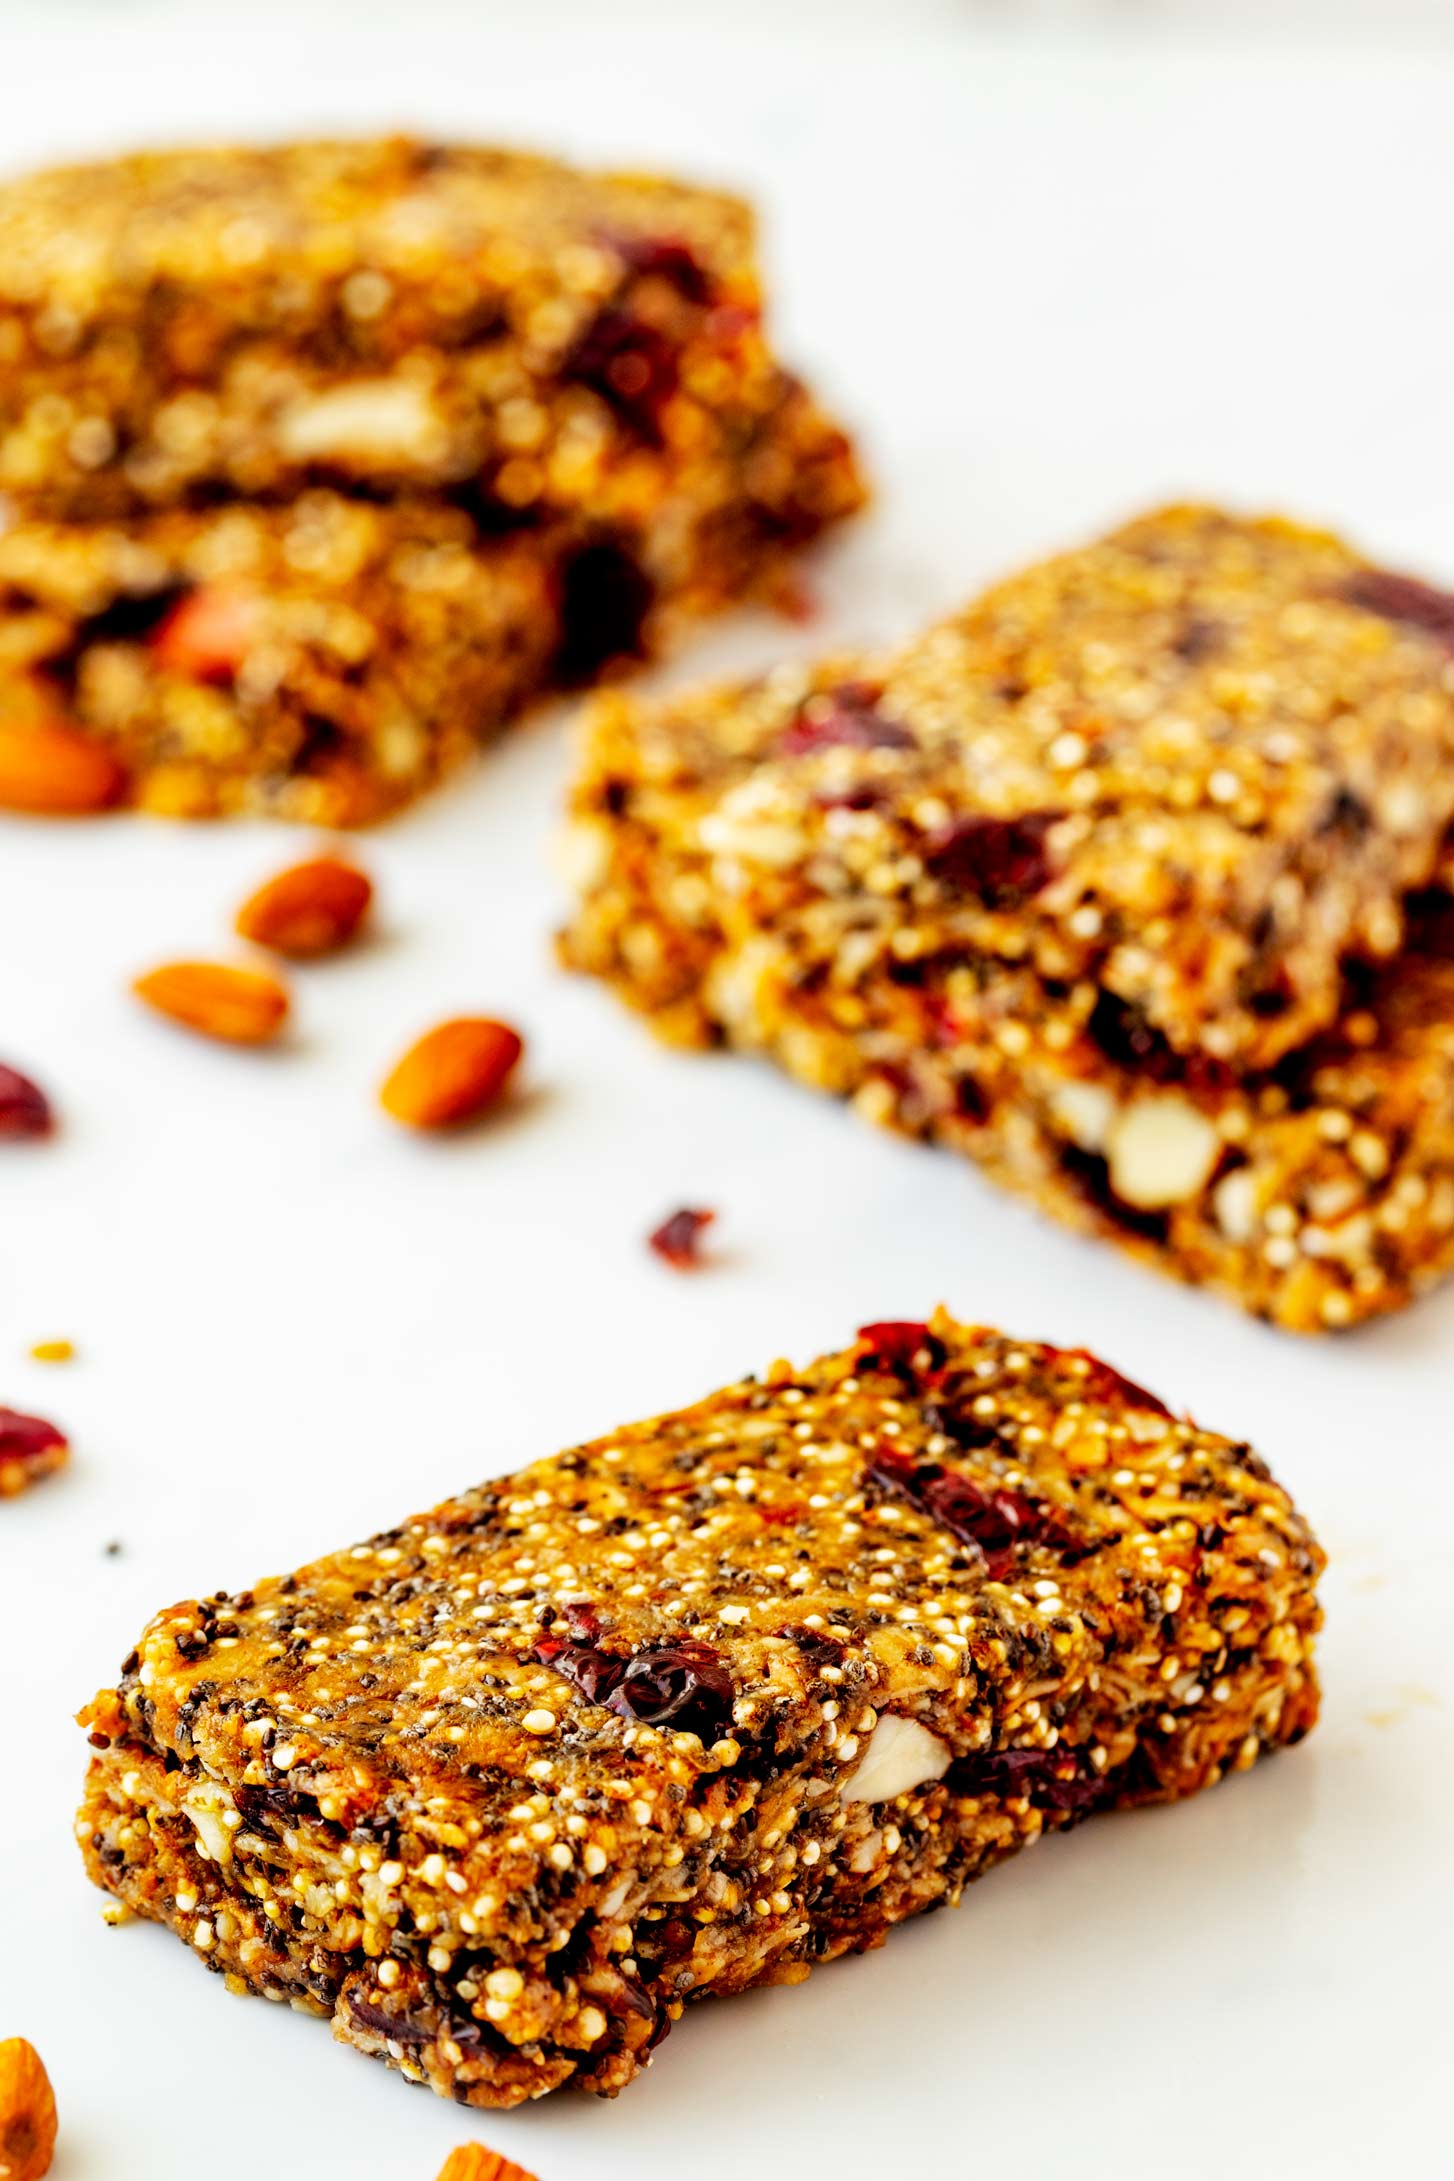 Photo of a protein power bar sitting in front of two stacks of protein power bars with almonds and cranberries beside it.